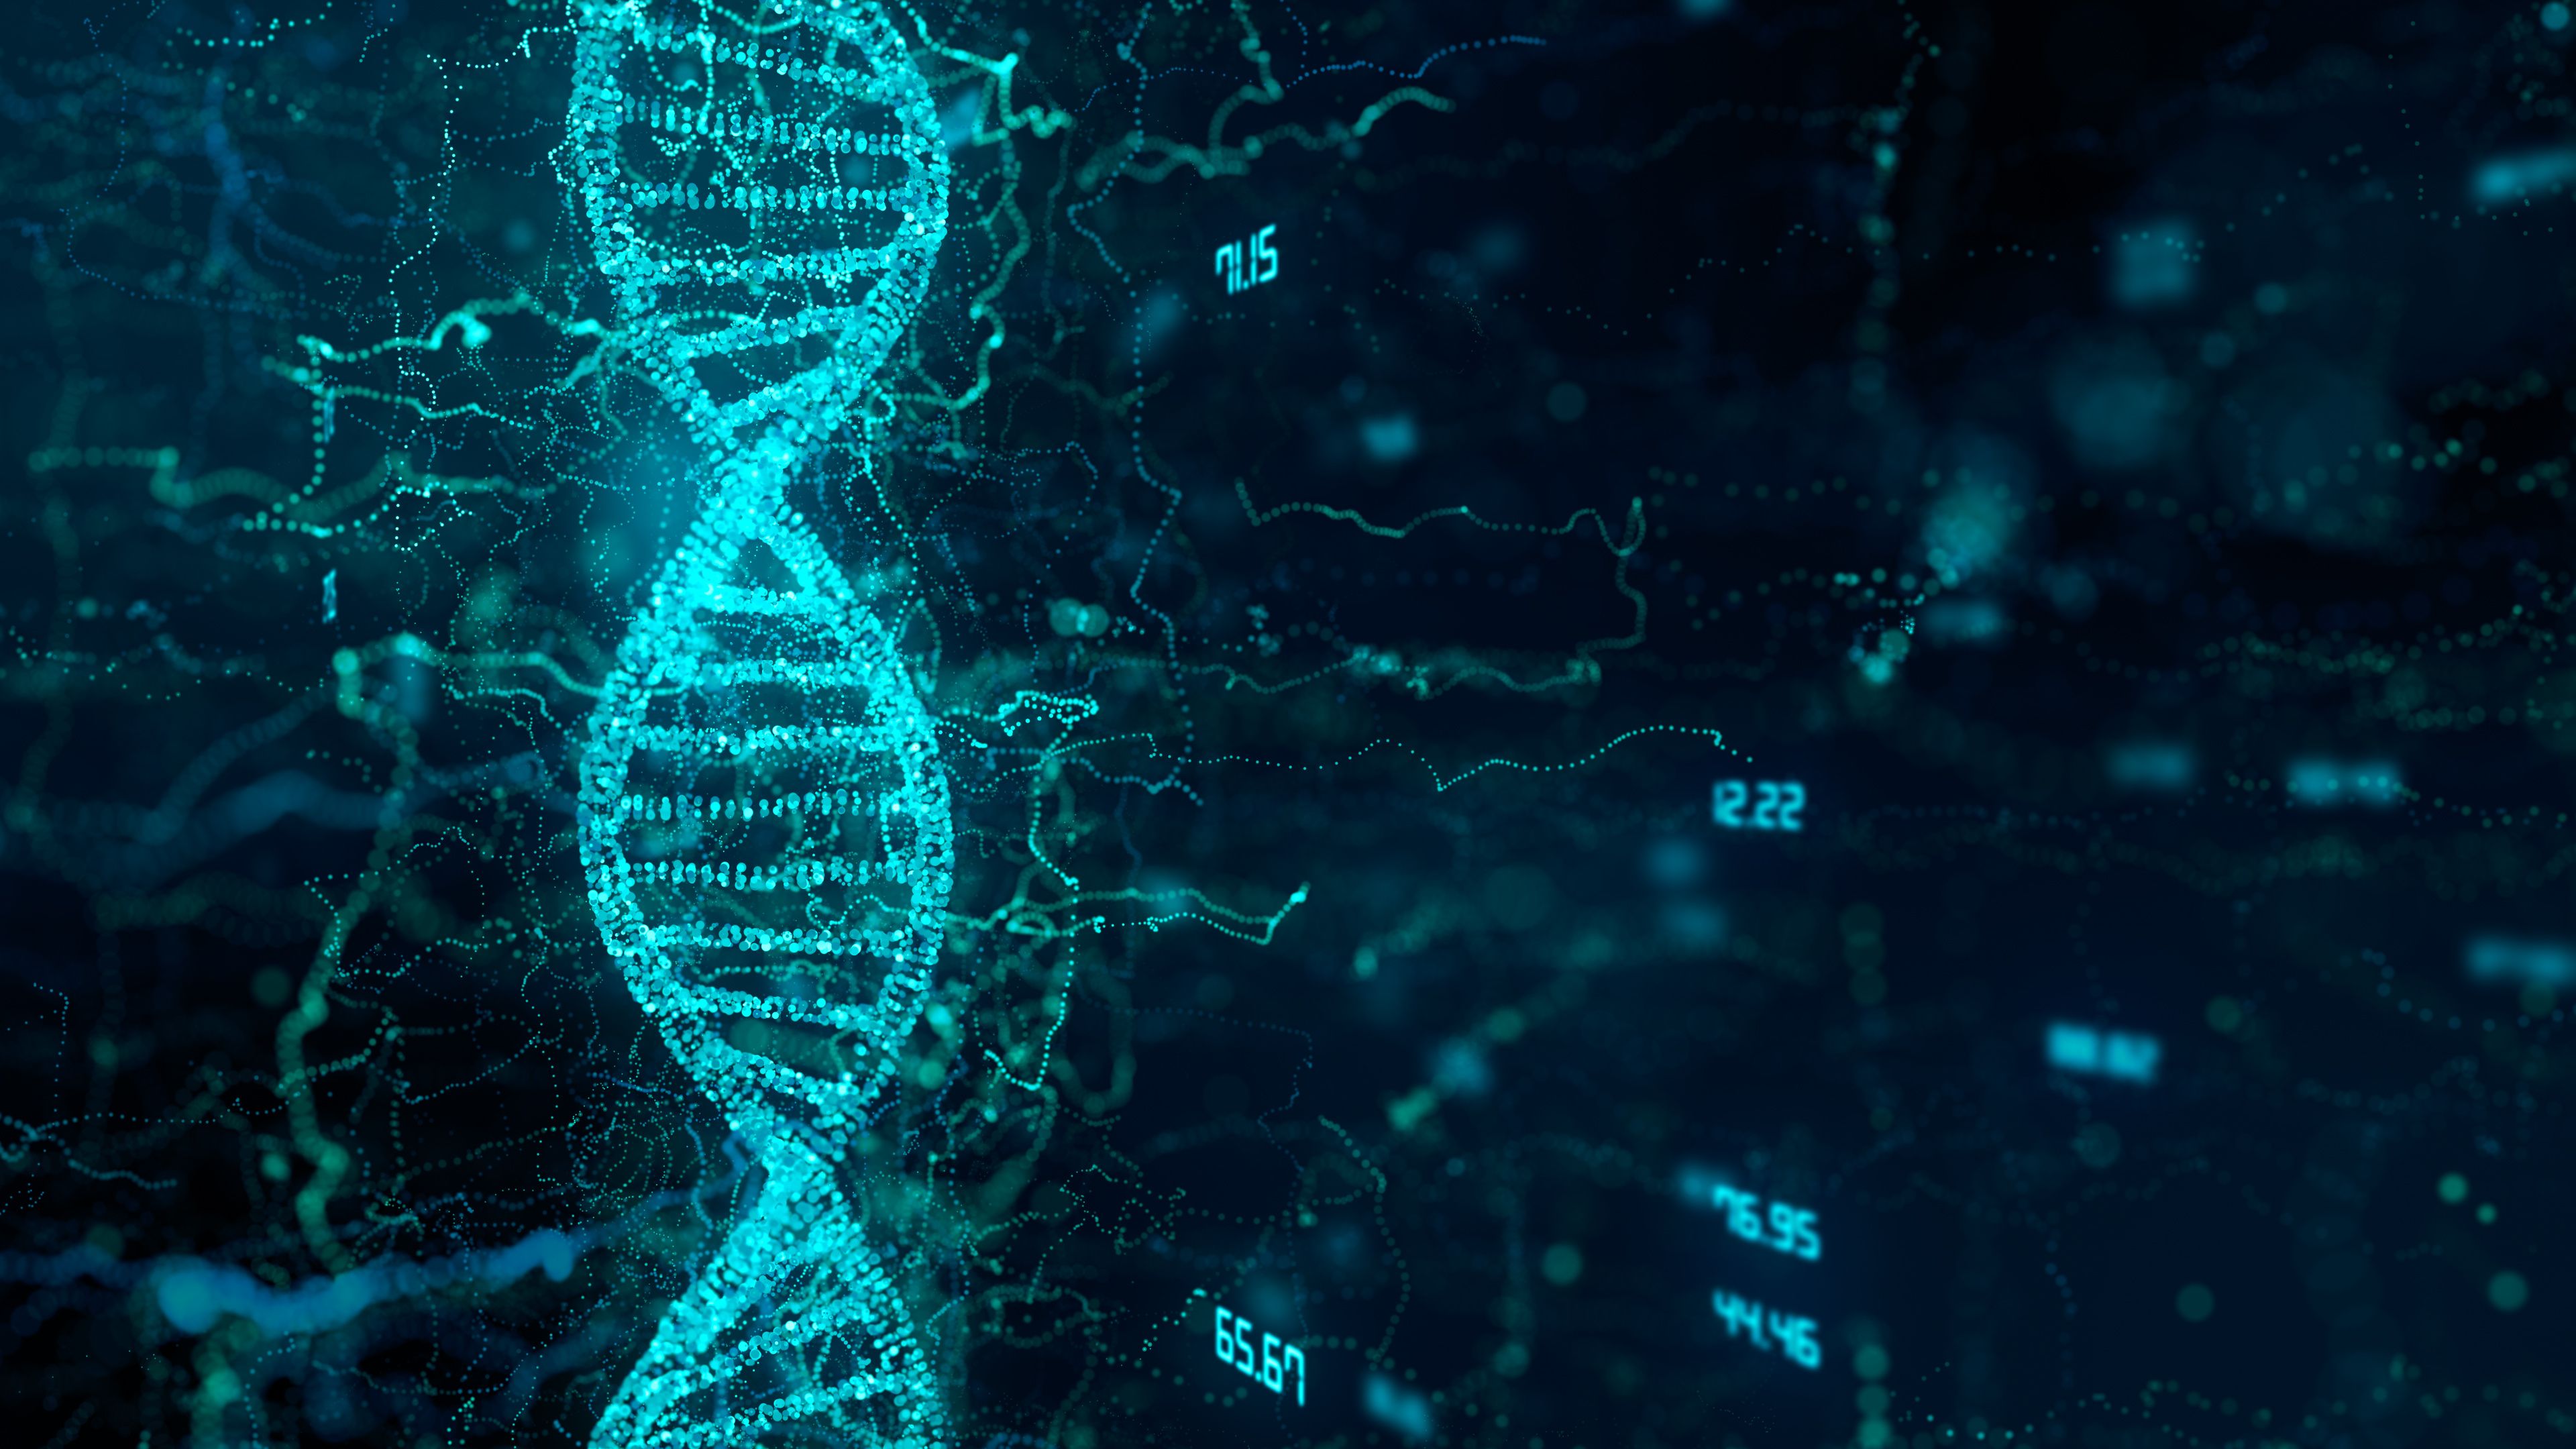 DNA | Image credit: immimagery - stock.adobe.com